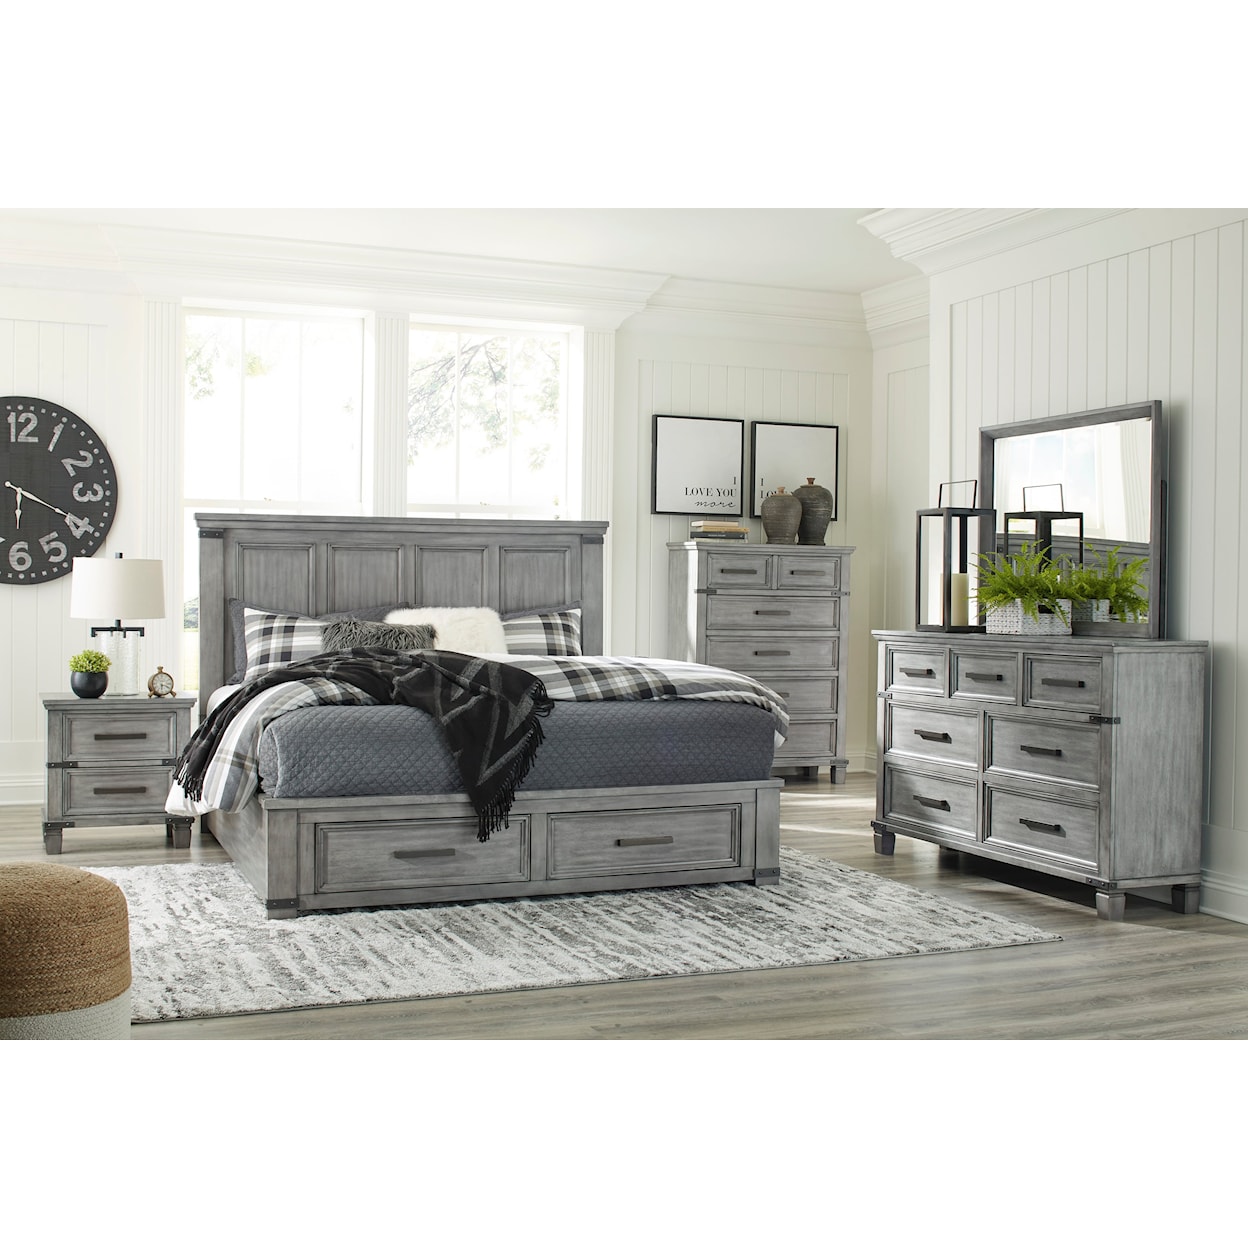 Signature Design by Ashley Russelyn Queen Storage Bed